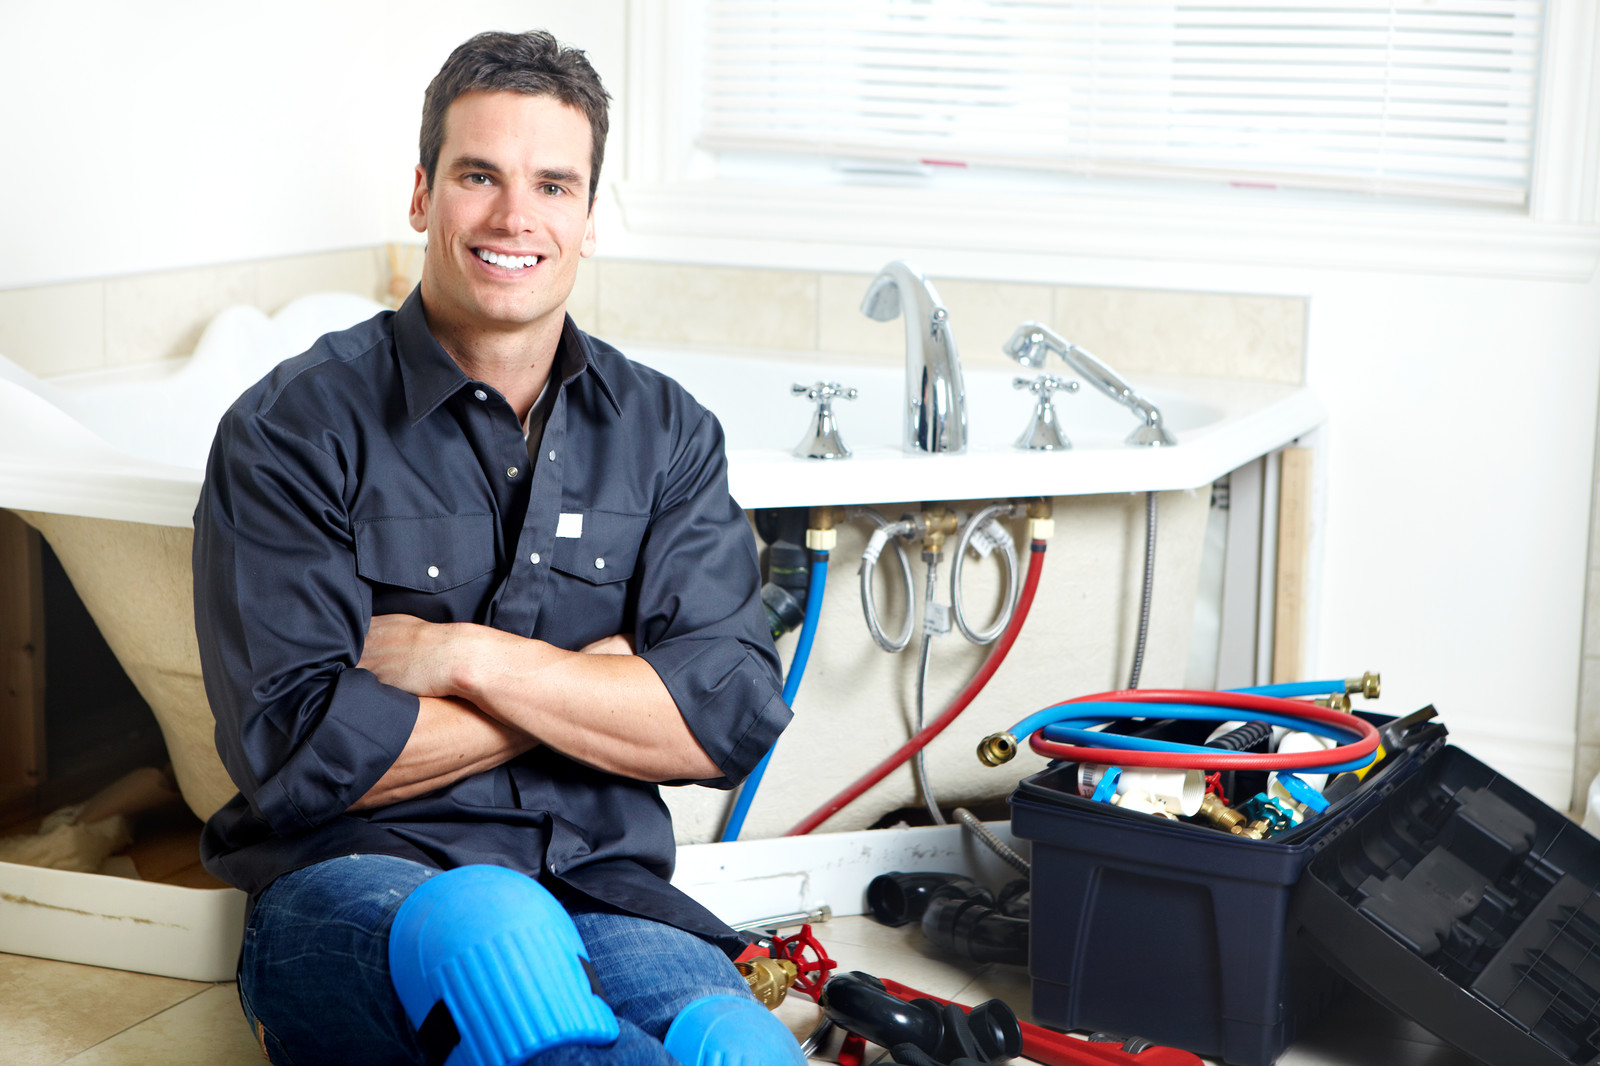 How to Find Reliable Plumbers in West Palm Beach, FL